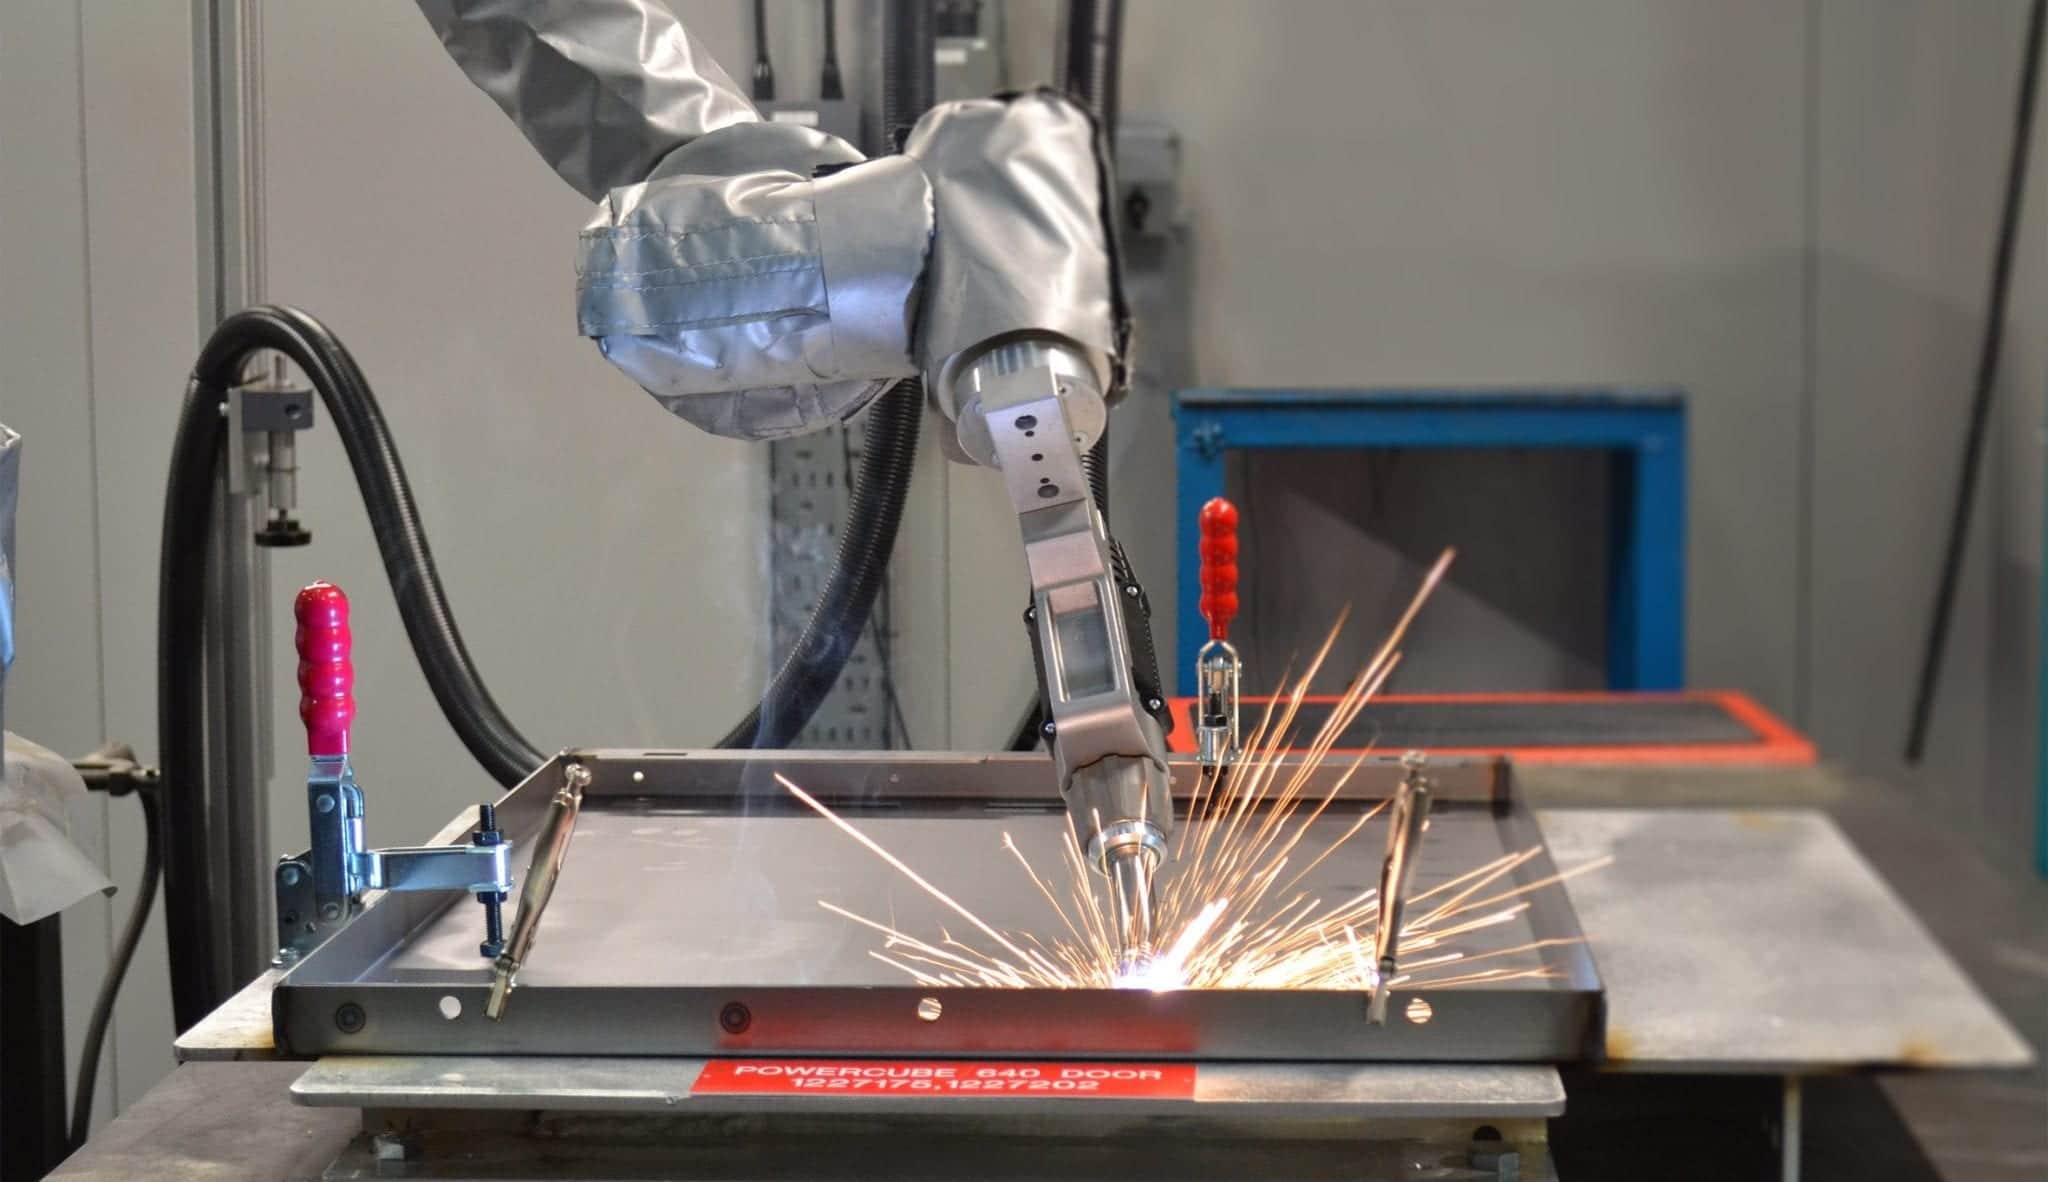 Olympus Technologies offers the market leading cobot welding solution in the UK and Ireland. It is the cost-effective solution to delivering robotic welding within your business, and offers you significant productivity increases.